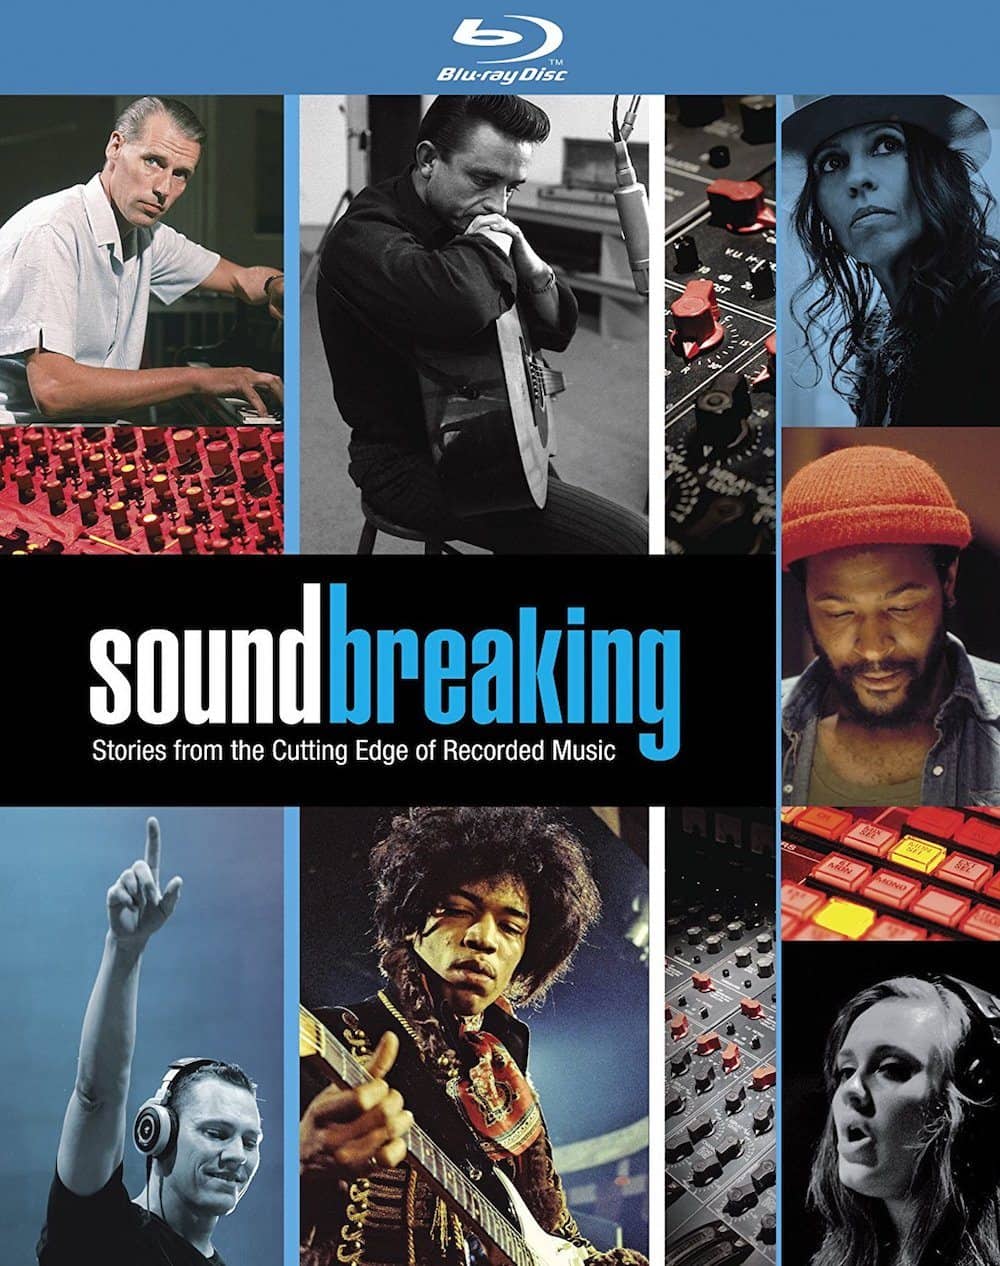 soundbreaking-stories-from-the-cutting-edge-of-recorded-music